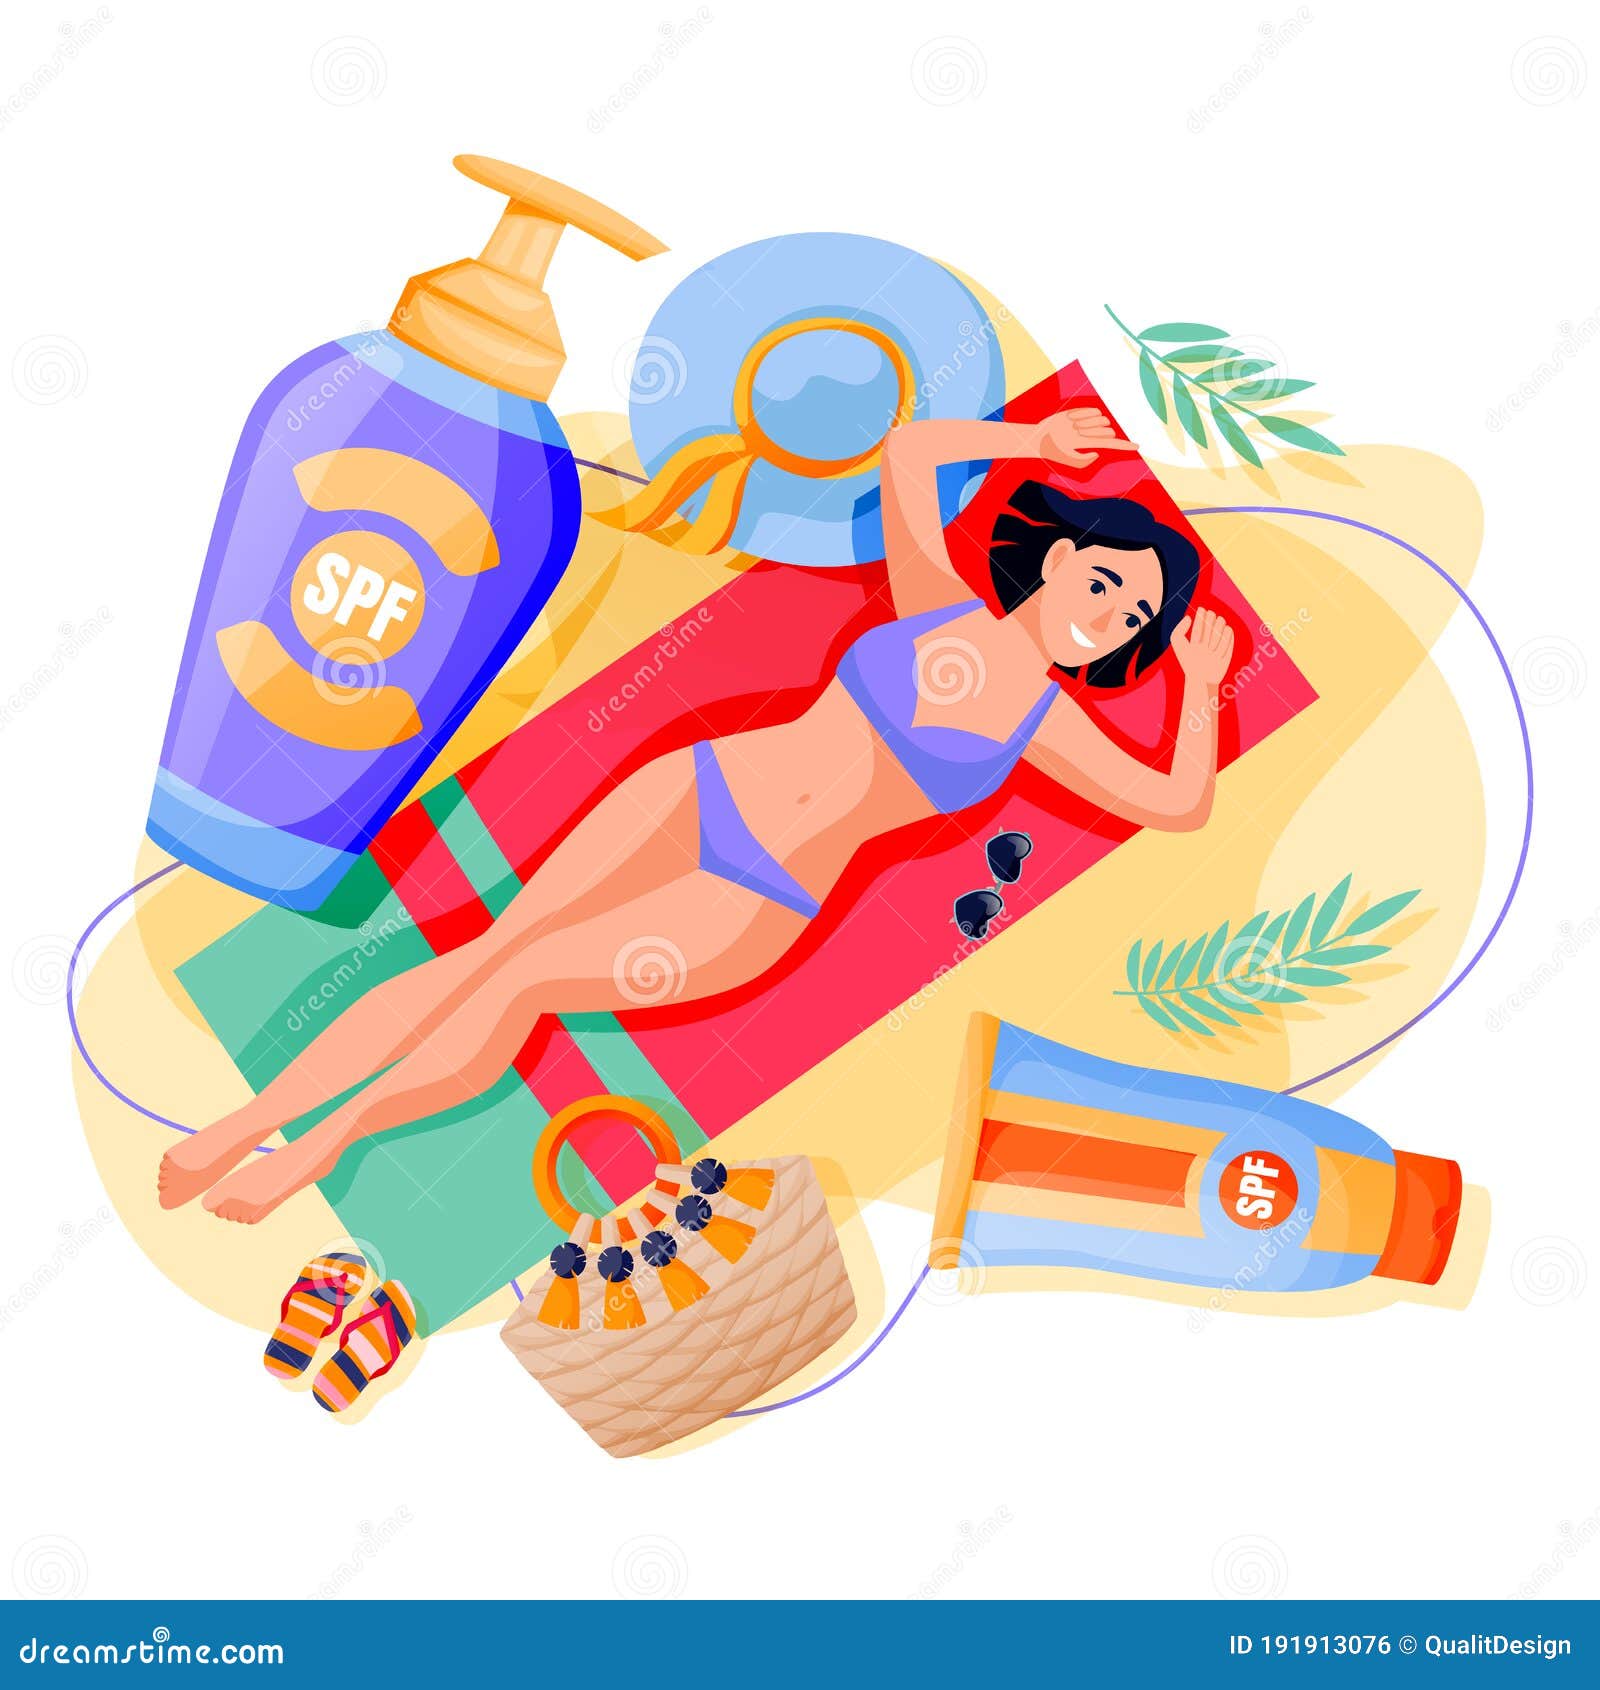 summer face body solar protection. woman sunbathing with sunblock.   of girl and sunscreen cosmetics